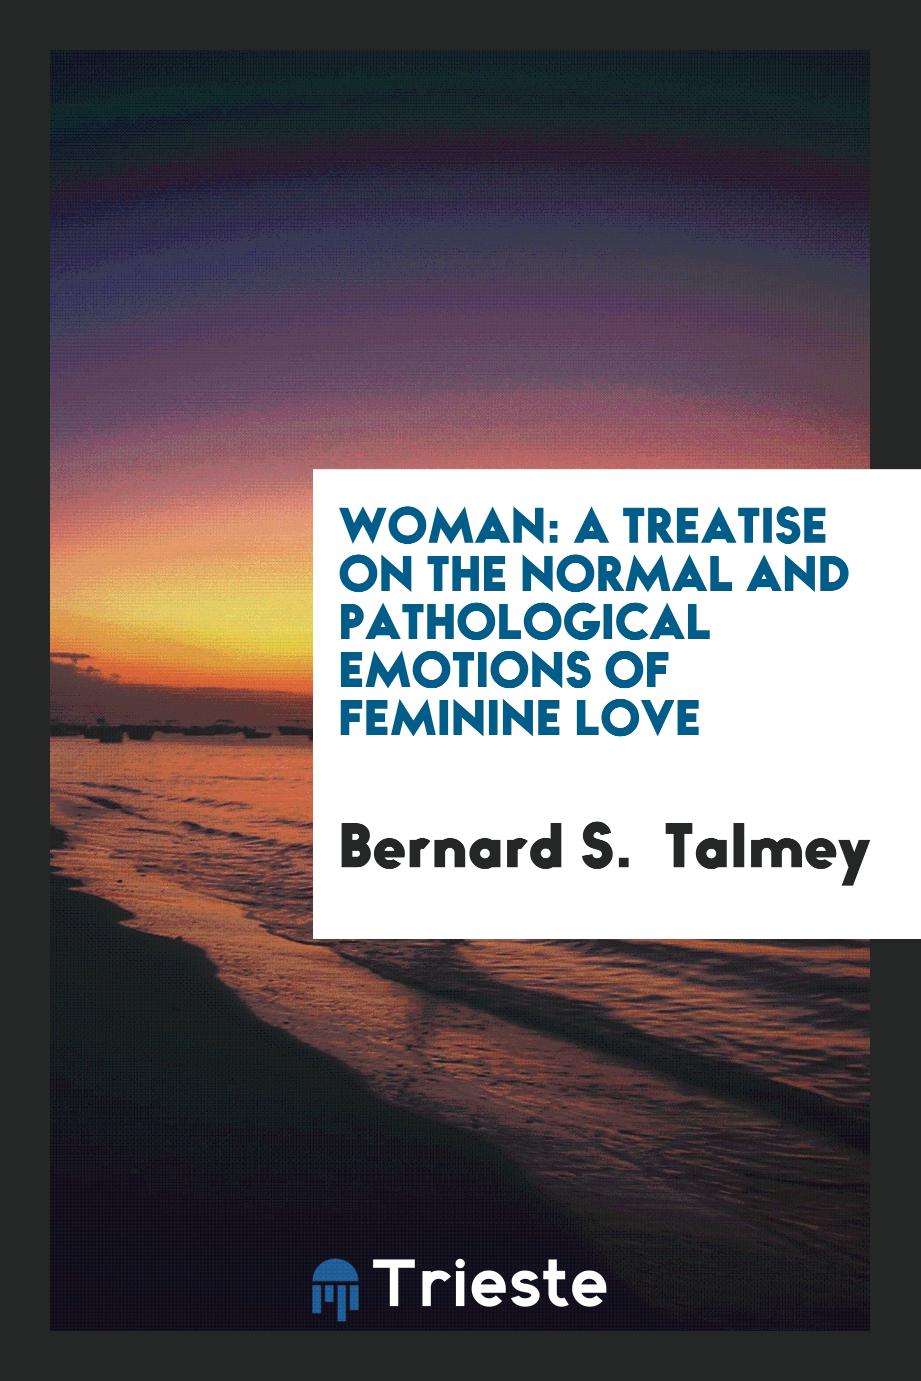 Woman: A Treatise on the Normal and Pathological Emotions of Feminine Love